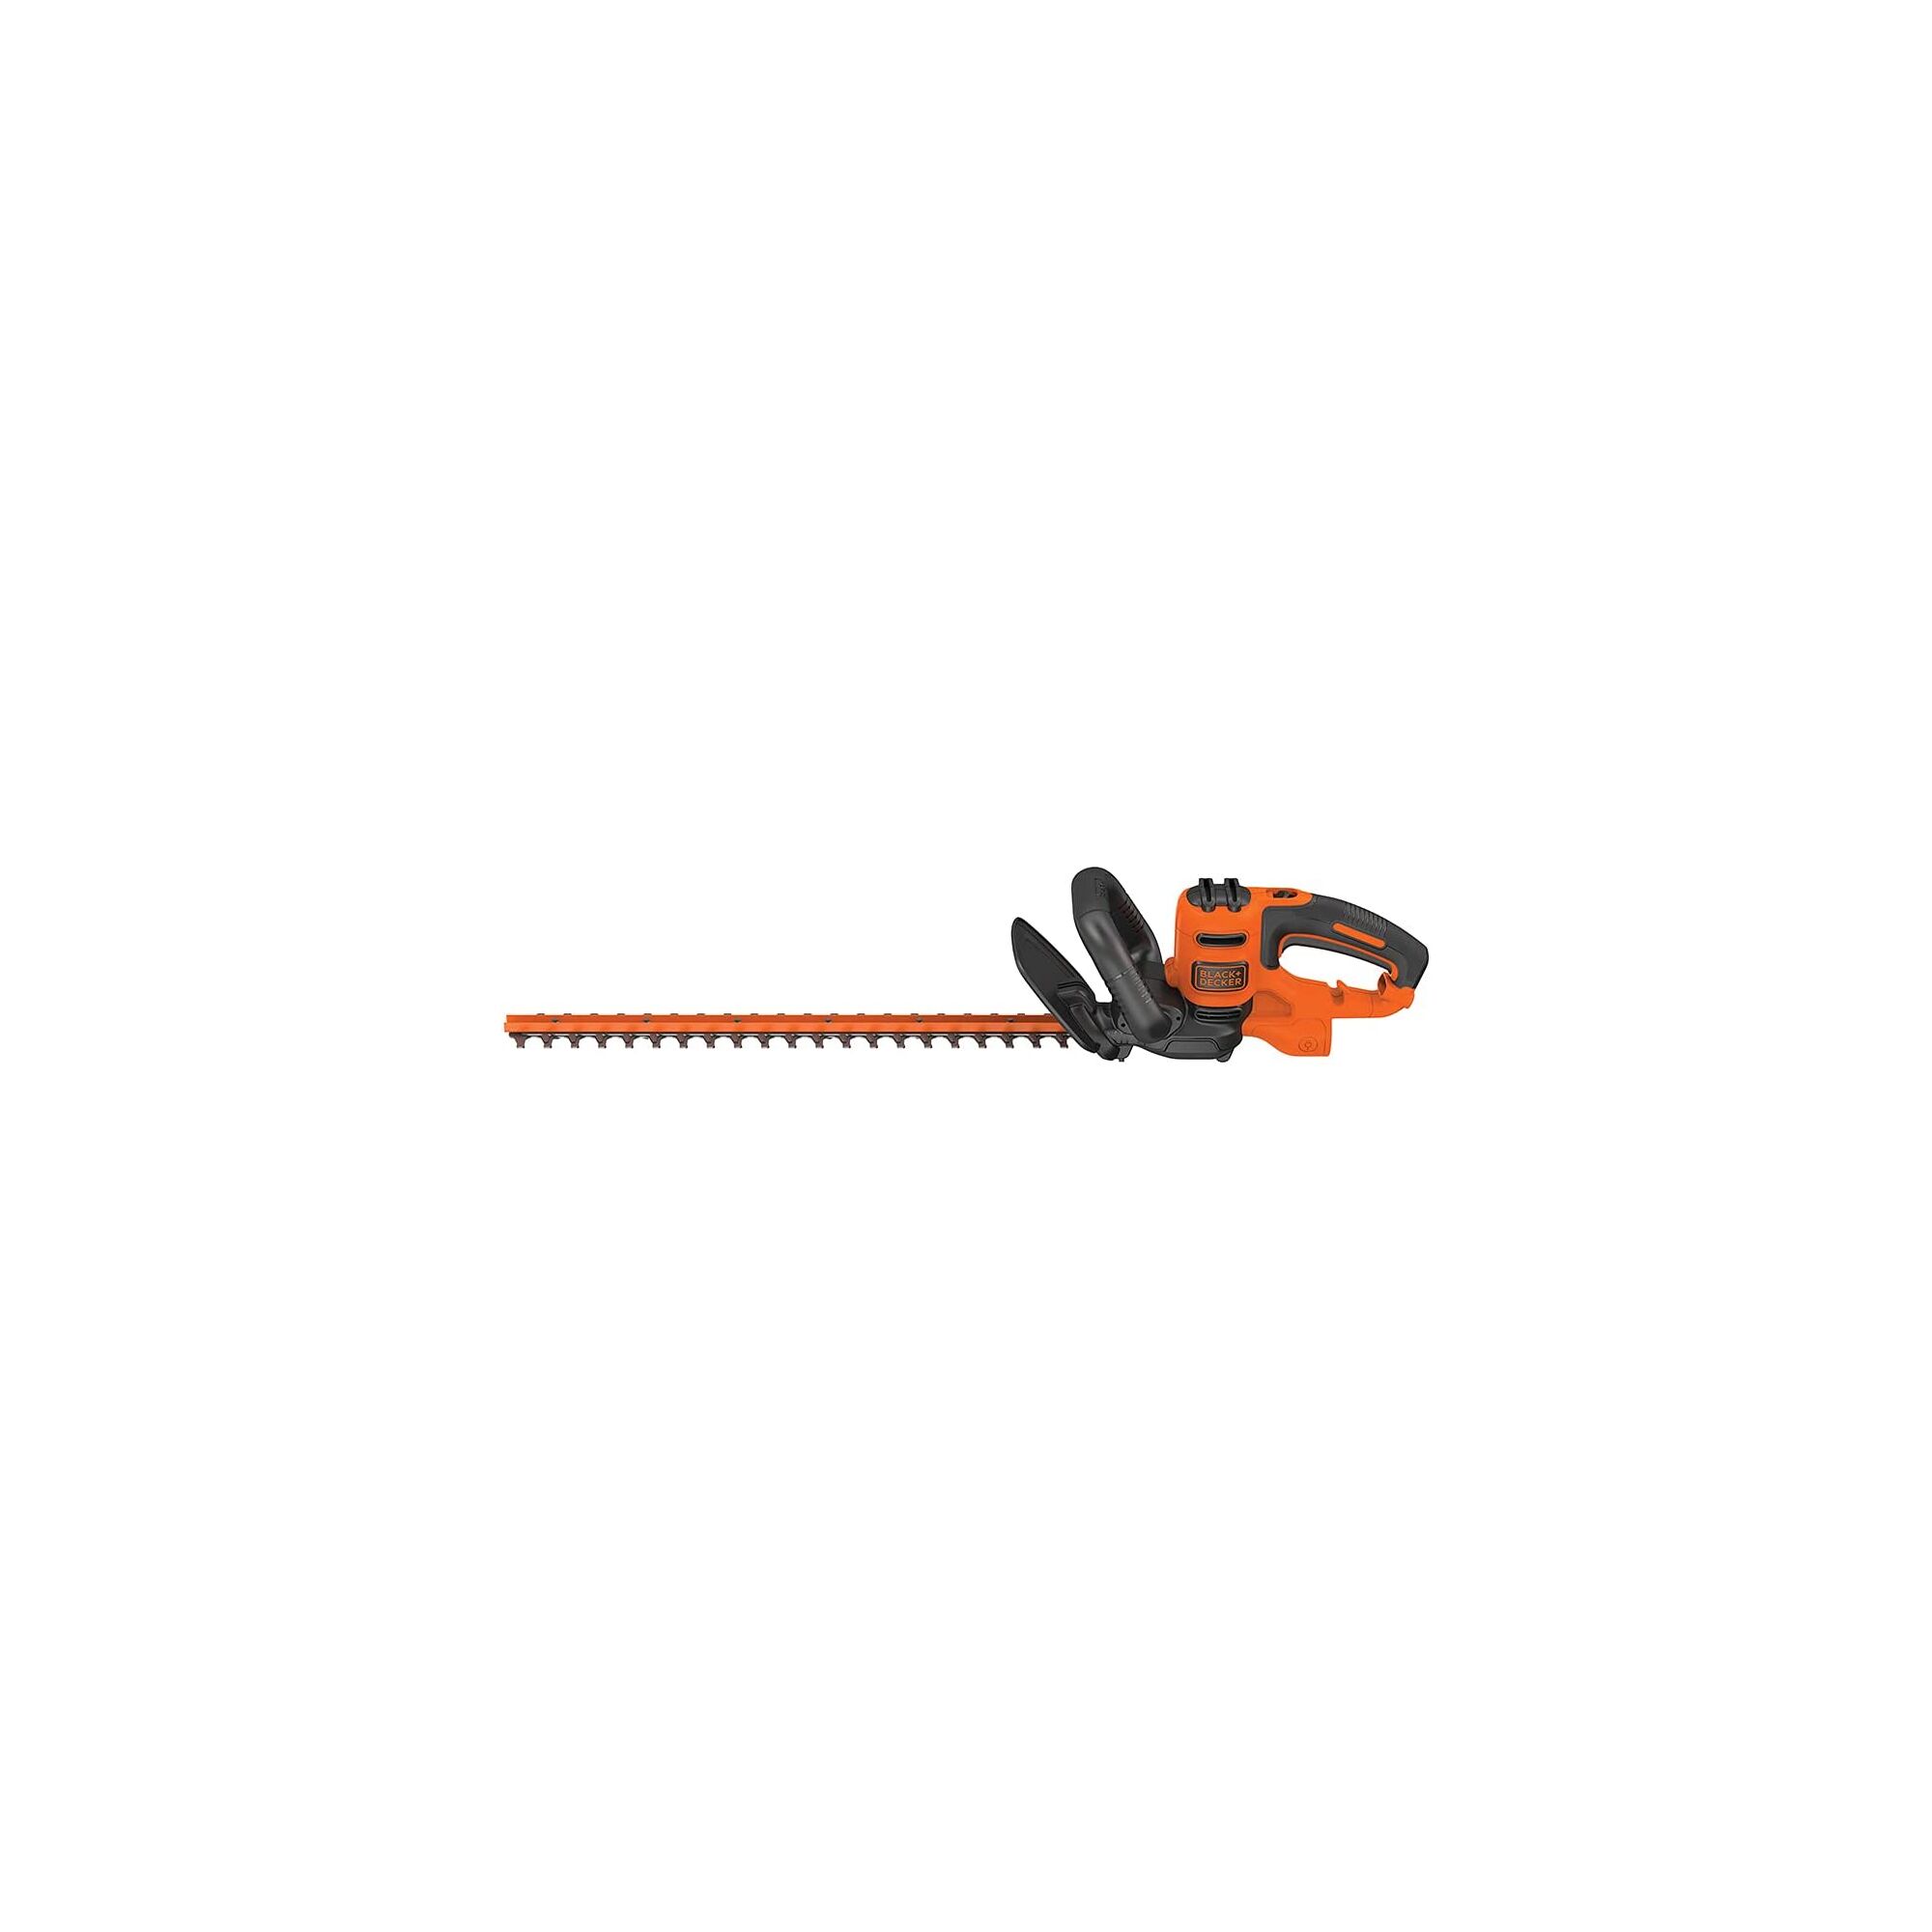 Profile of Black and decker 22 inch hedge trimmer